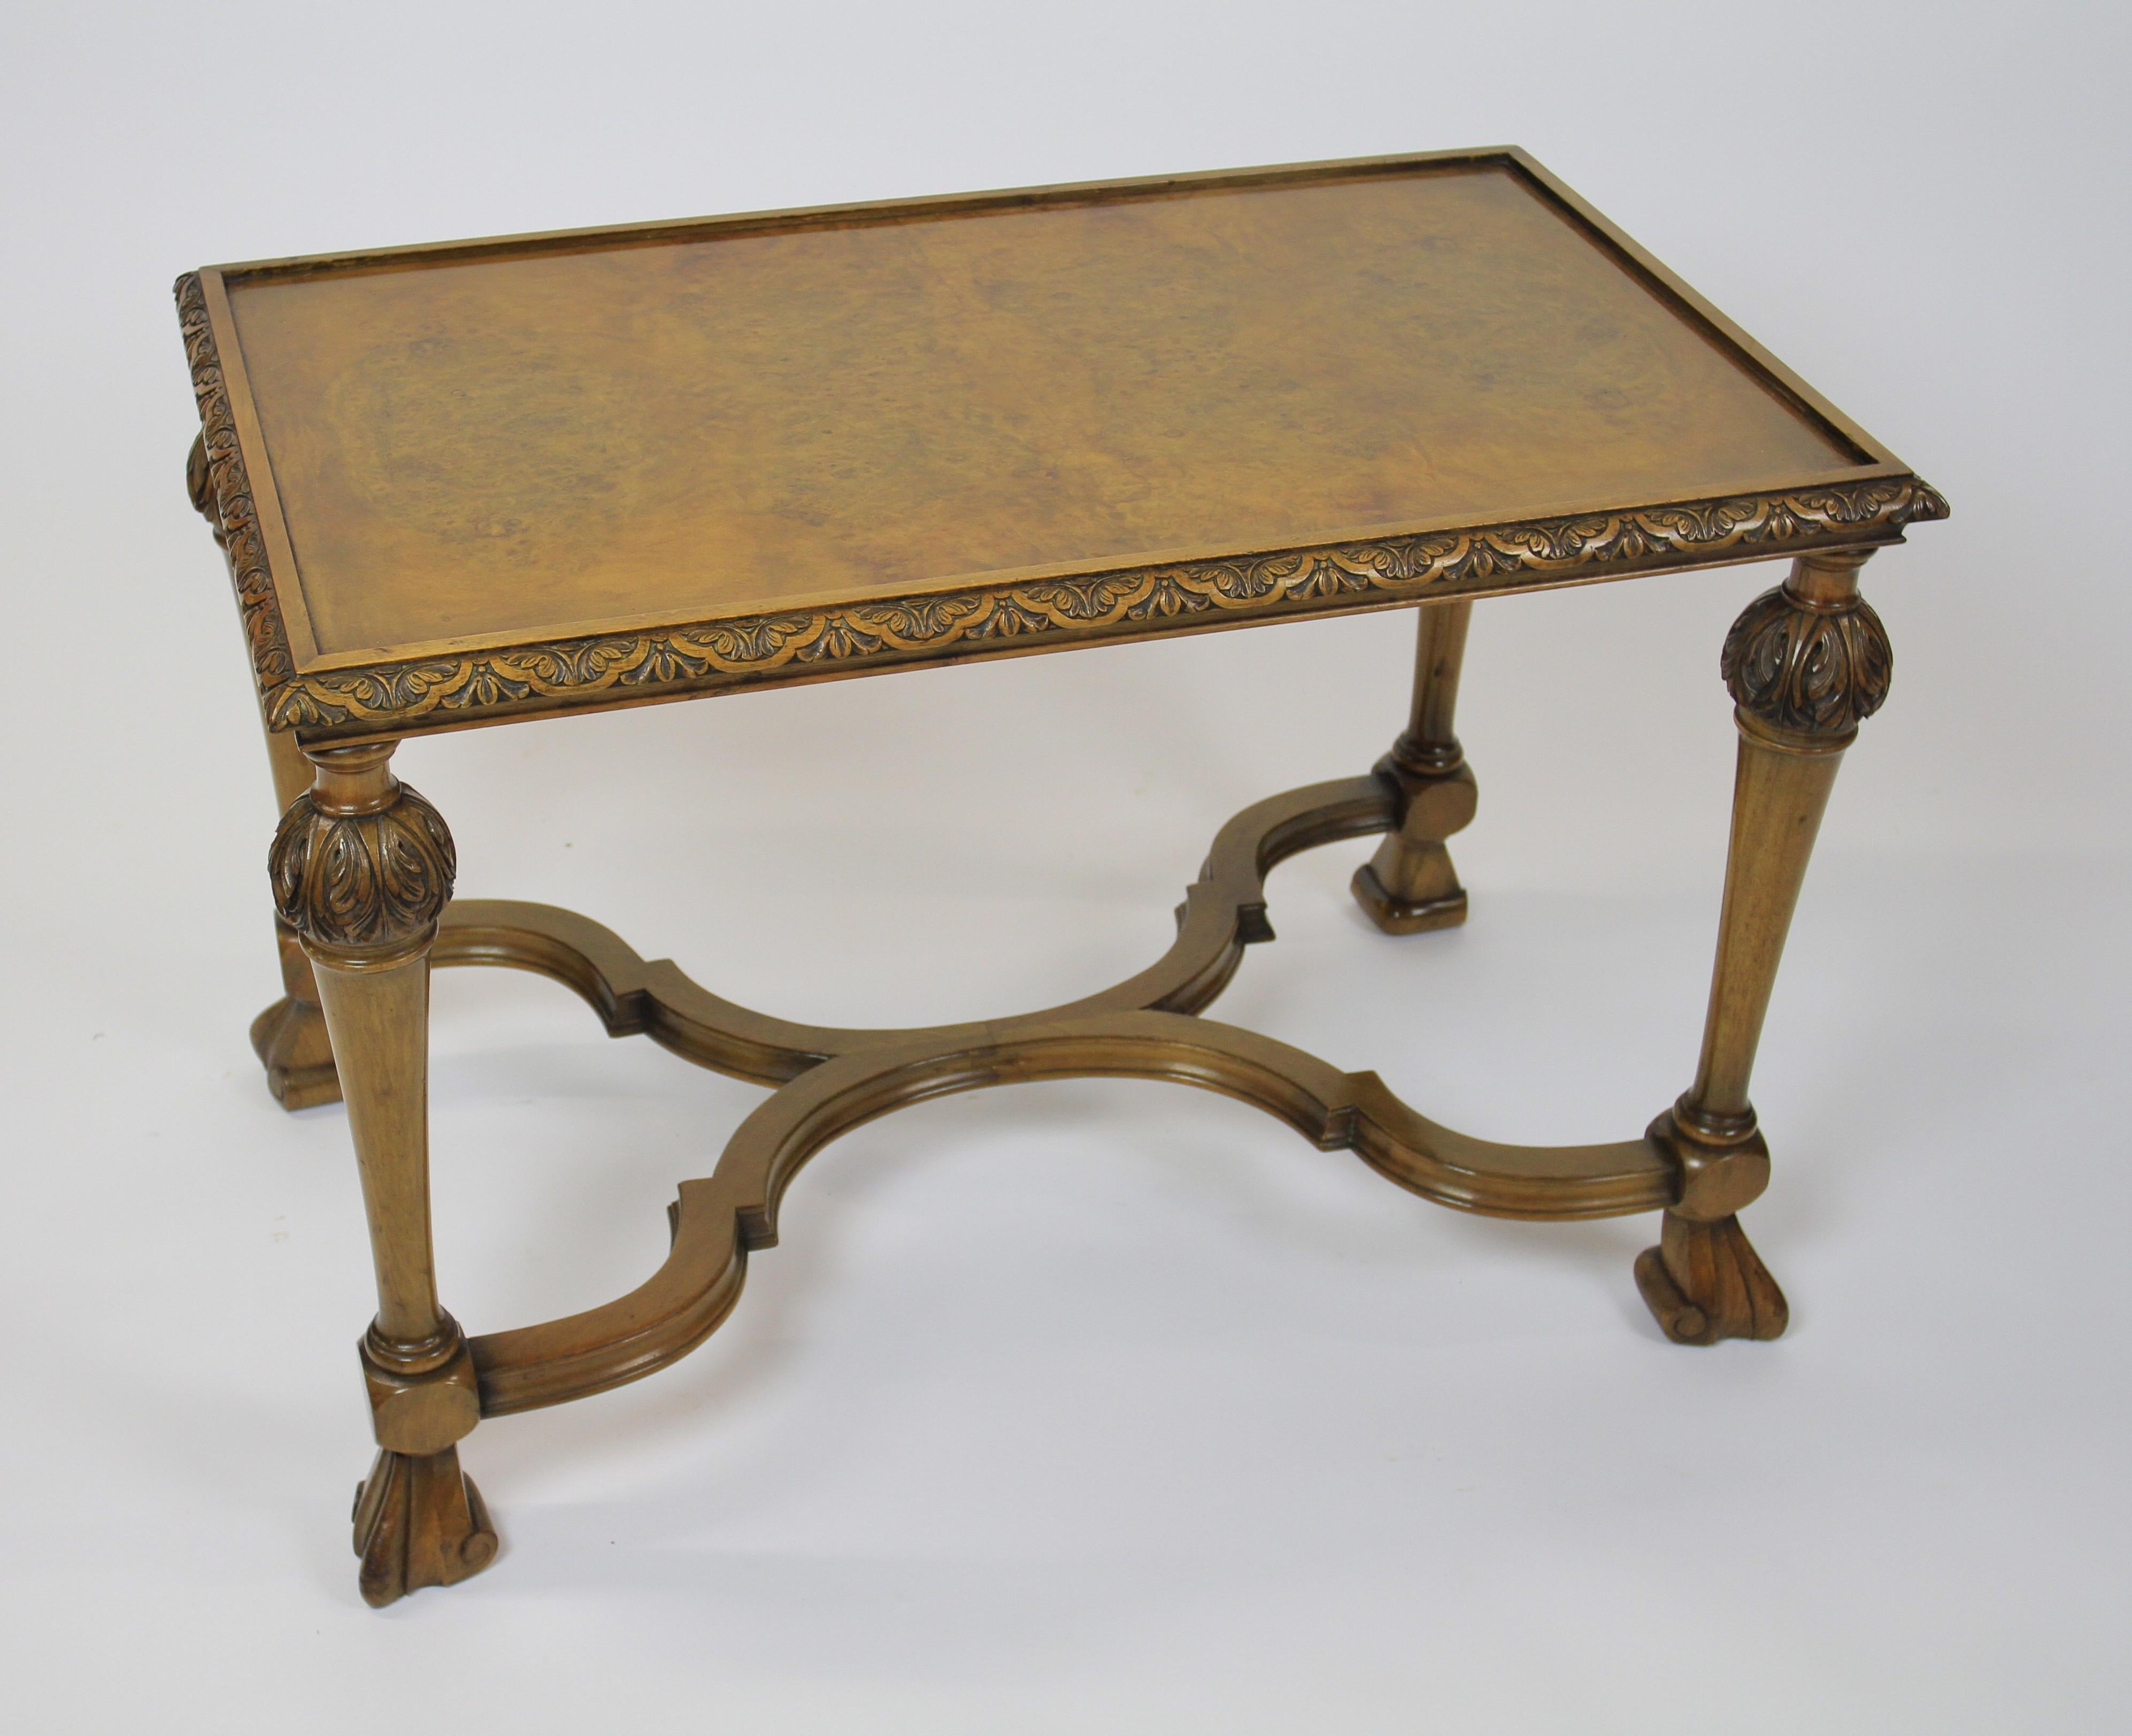 William & Mary Style Burr Walnut & Carved Coffee Table circa 1930s
Inset Burr Walnut Top
 With Carved Detail Around top edge,
4 carved & turned legs with Knurl shaped feet
Shaped Walnut Cross Stretcher
Recently Polished
Good quality table